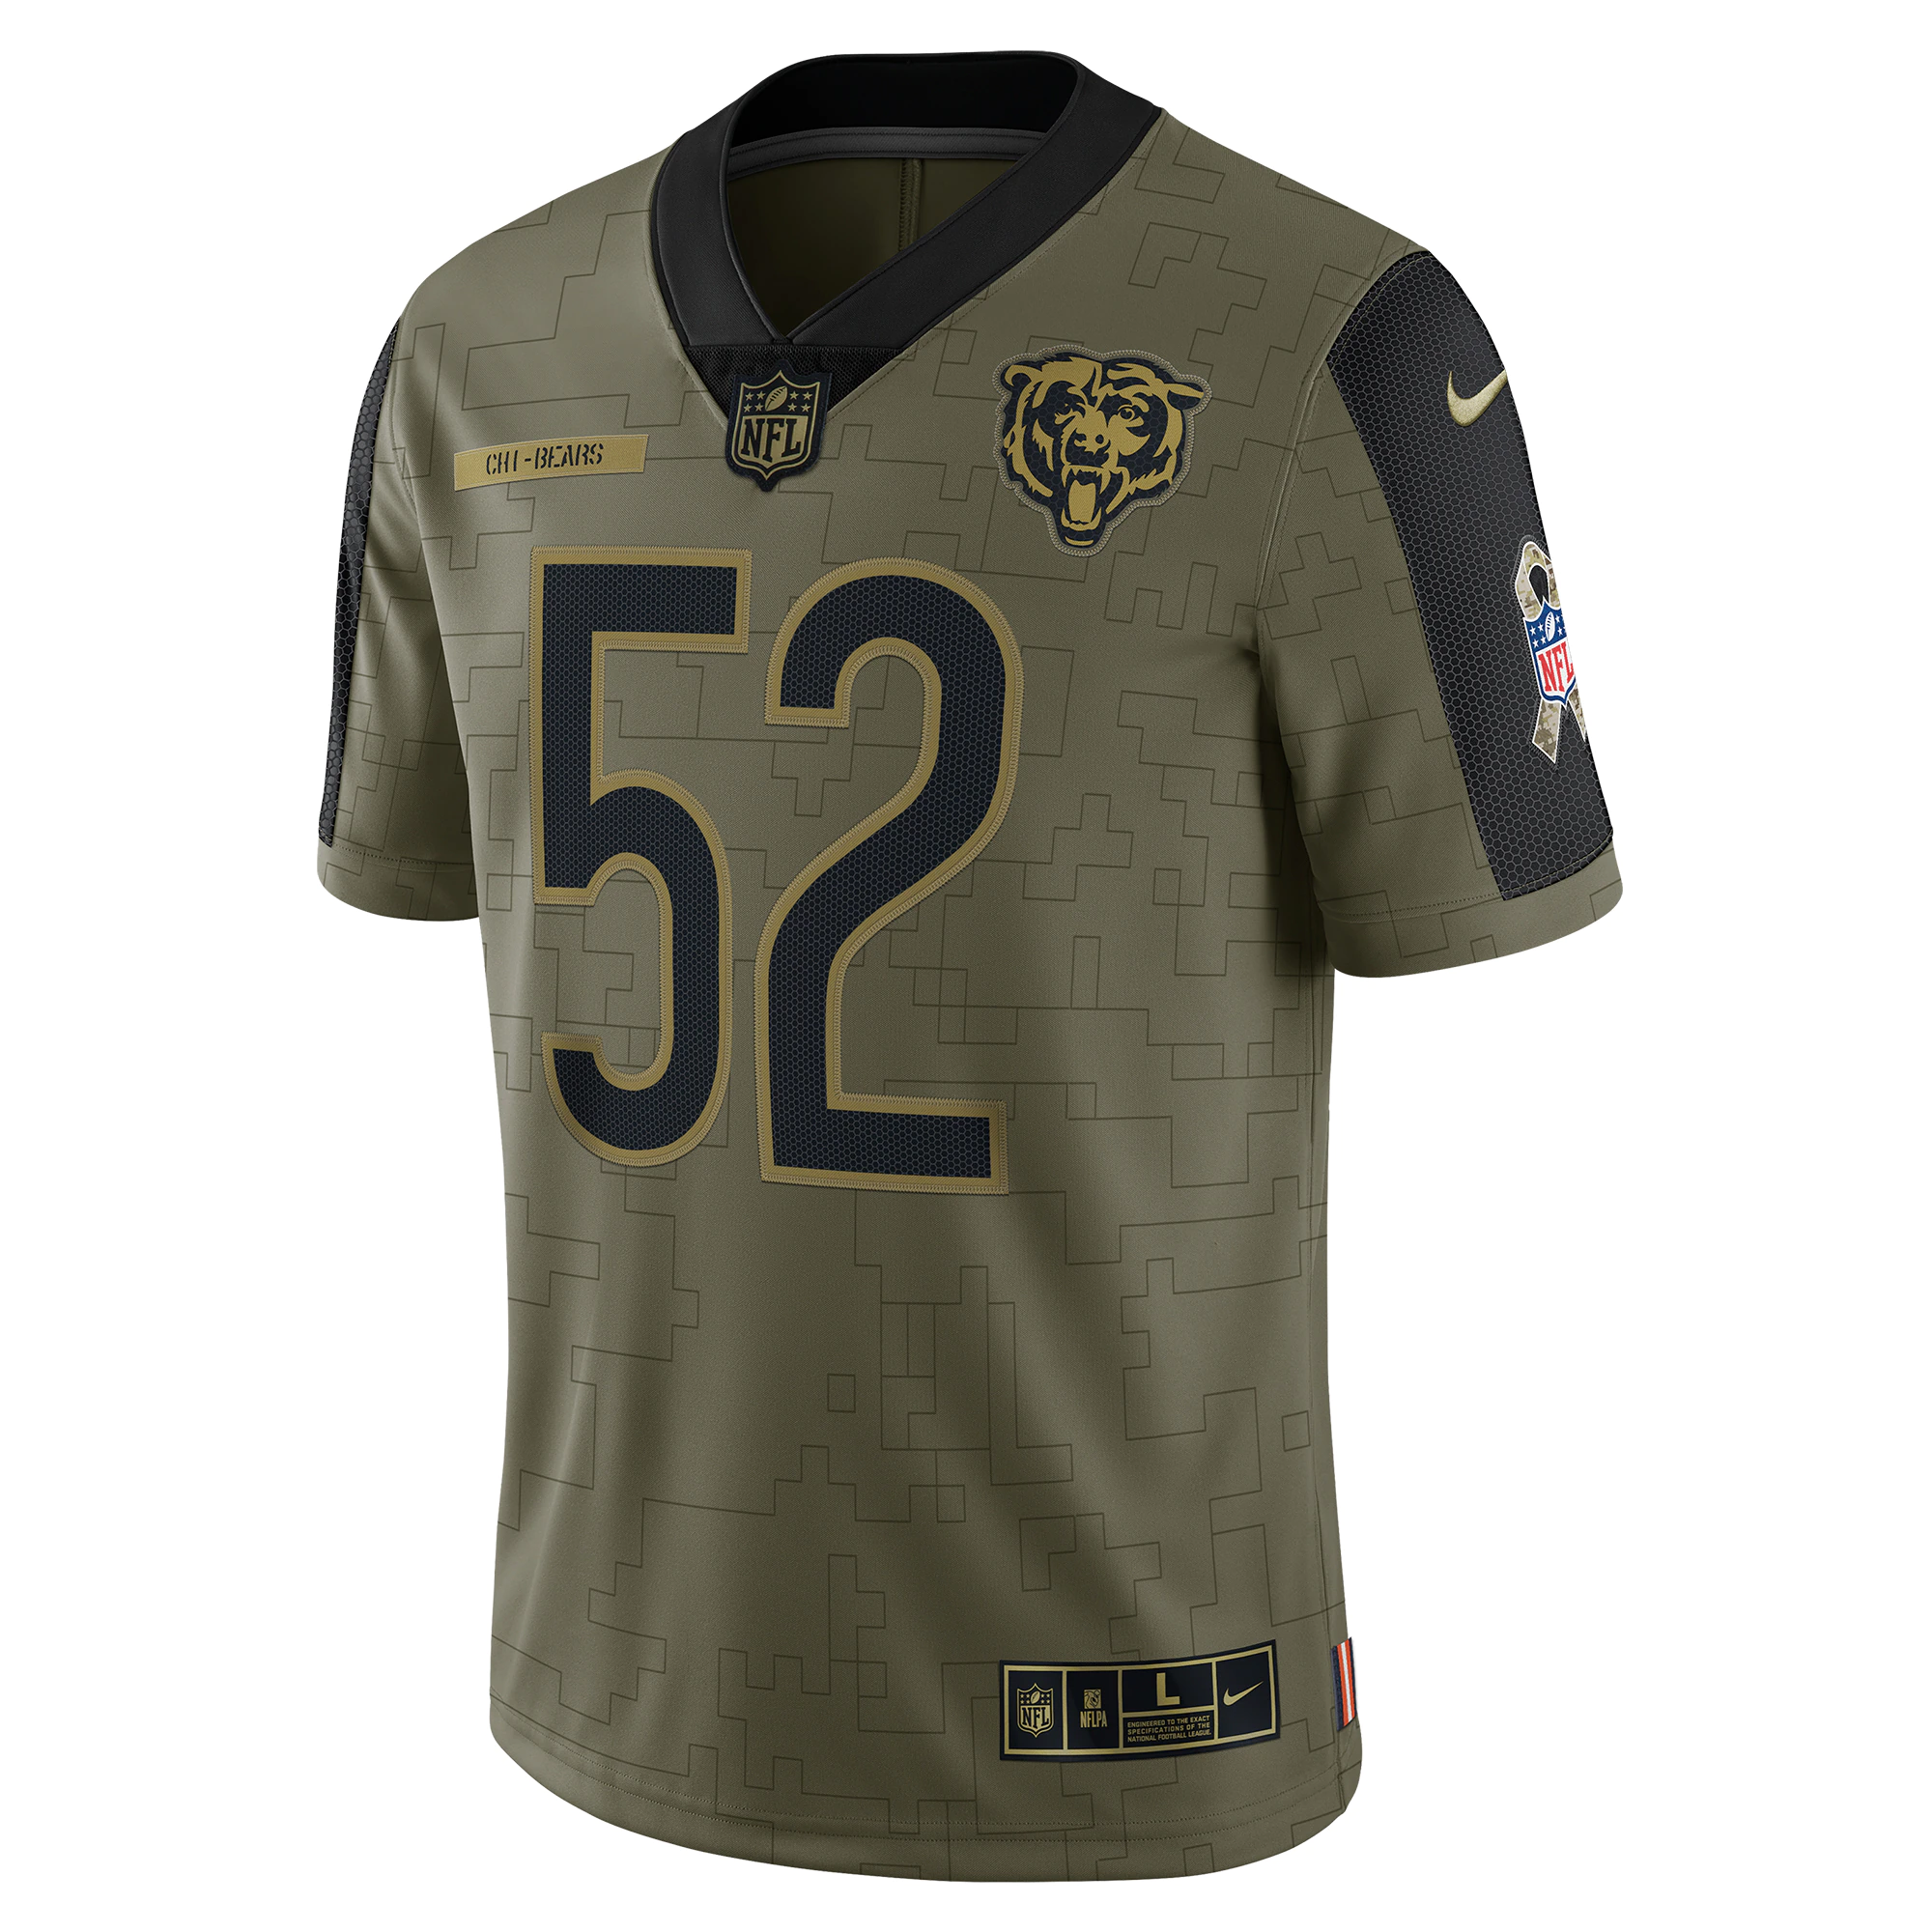 Men's Chicago Bears Khalil Mack Nike Olive 2021 Salute To Service Limited Player Jersey